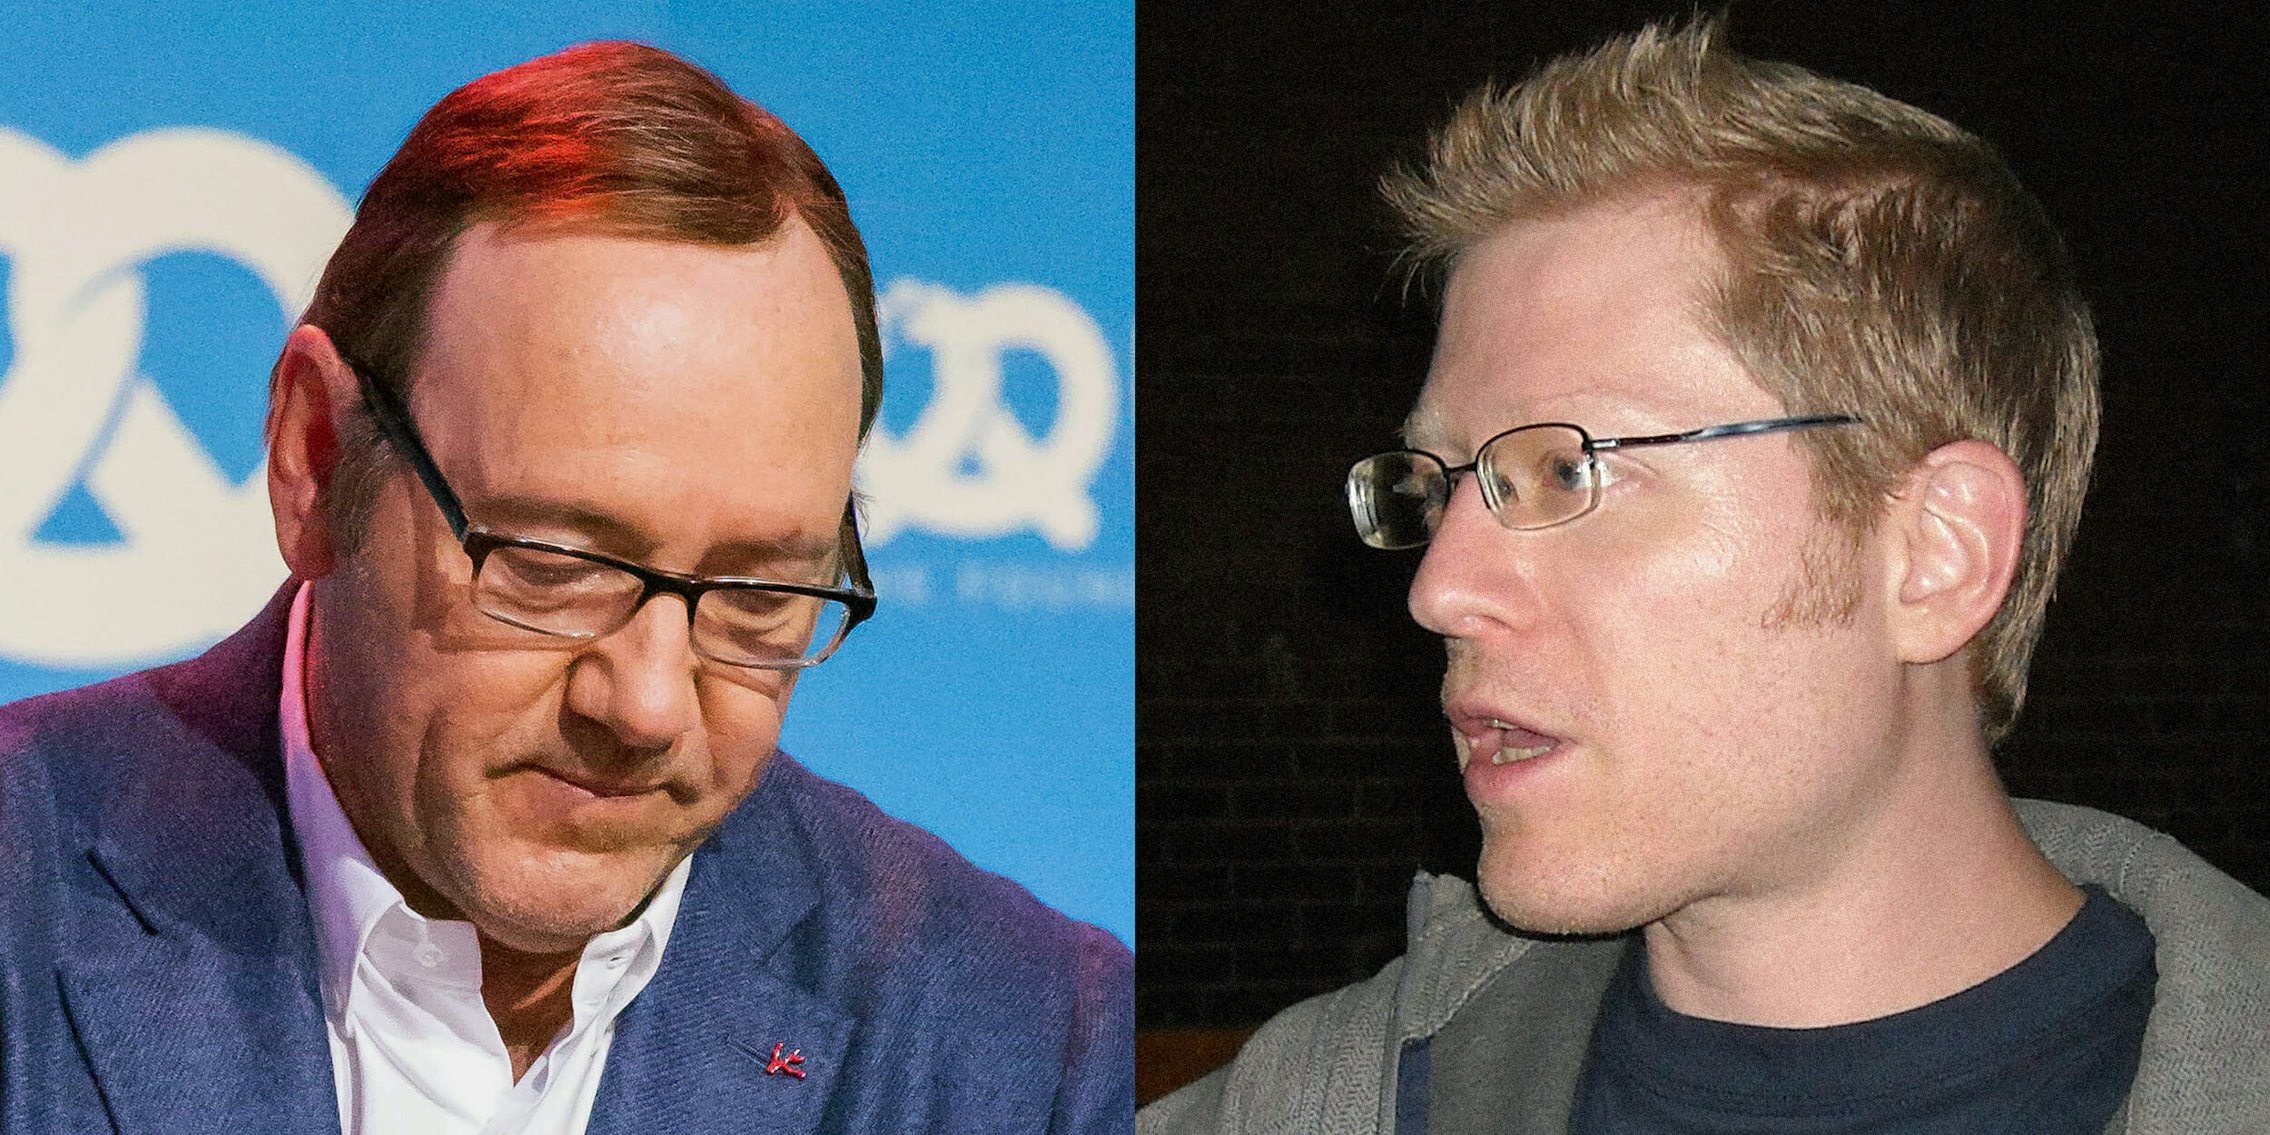 Kevin Spacey and Anthony Rapp